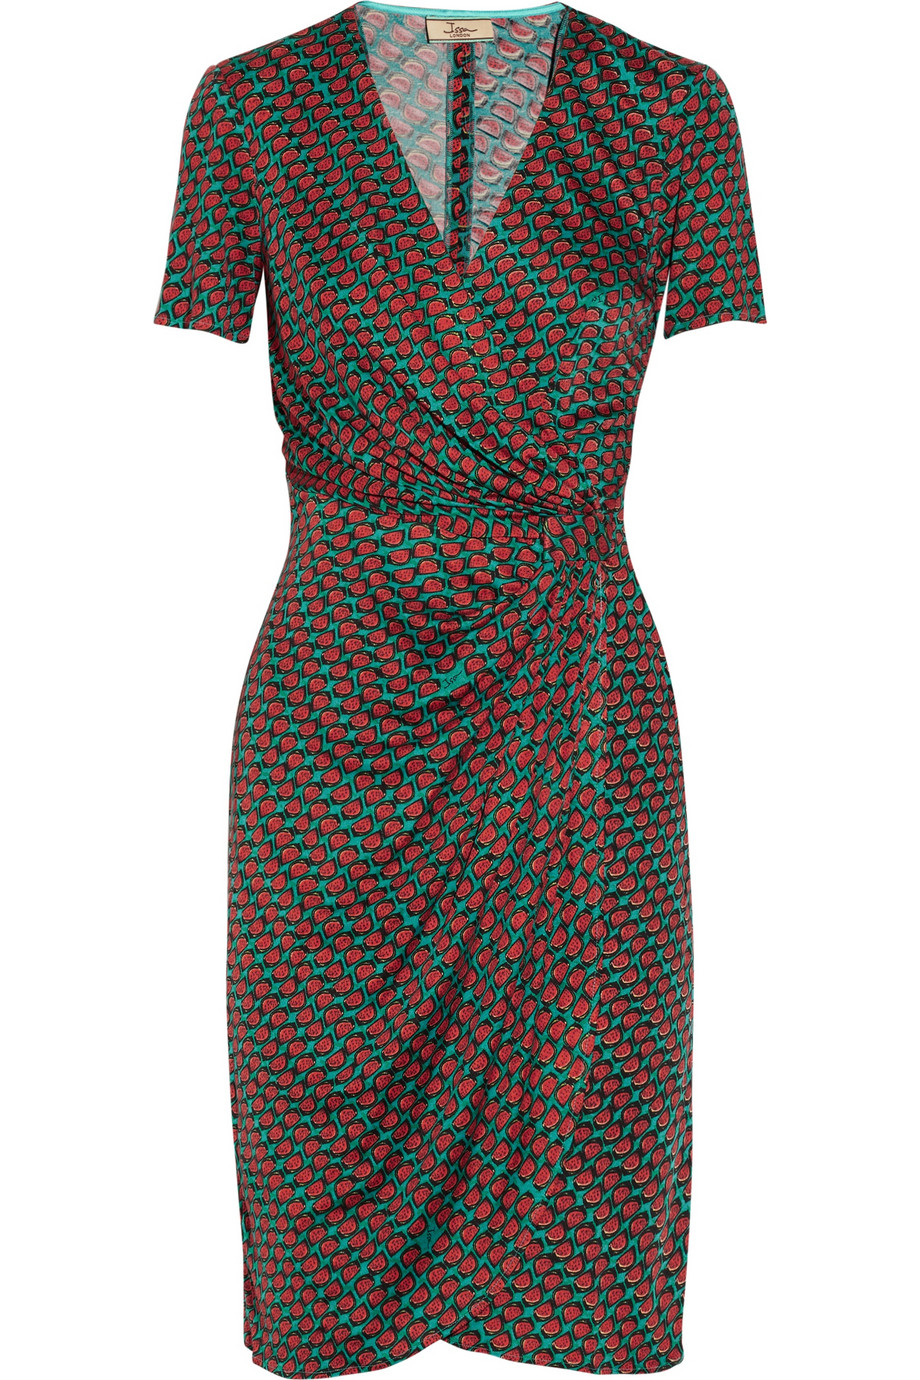 Issa Wrap Effect Printed Silk Jersey Dress in Red (Petrol) | Lyst